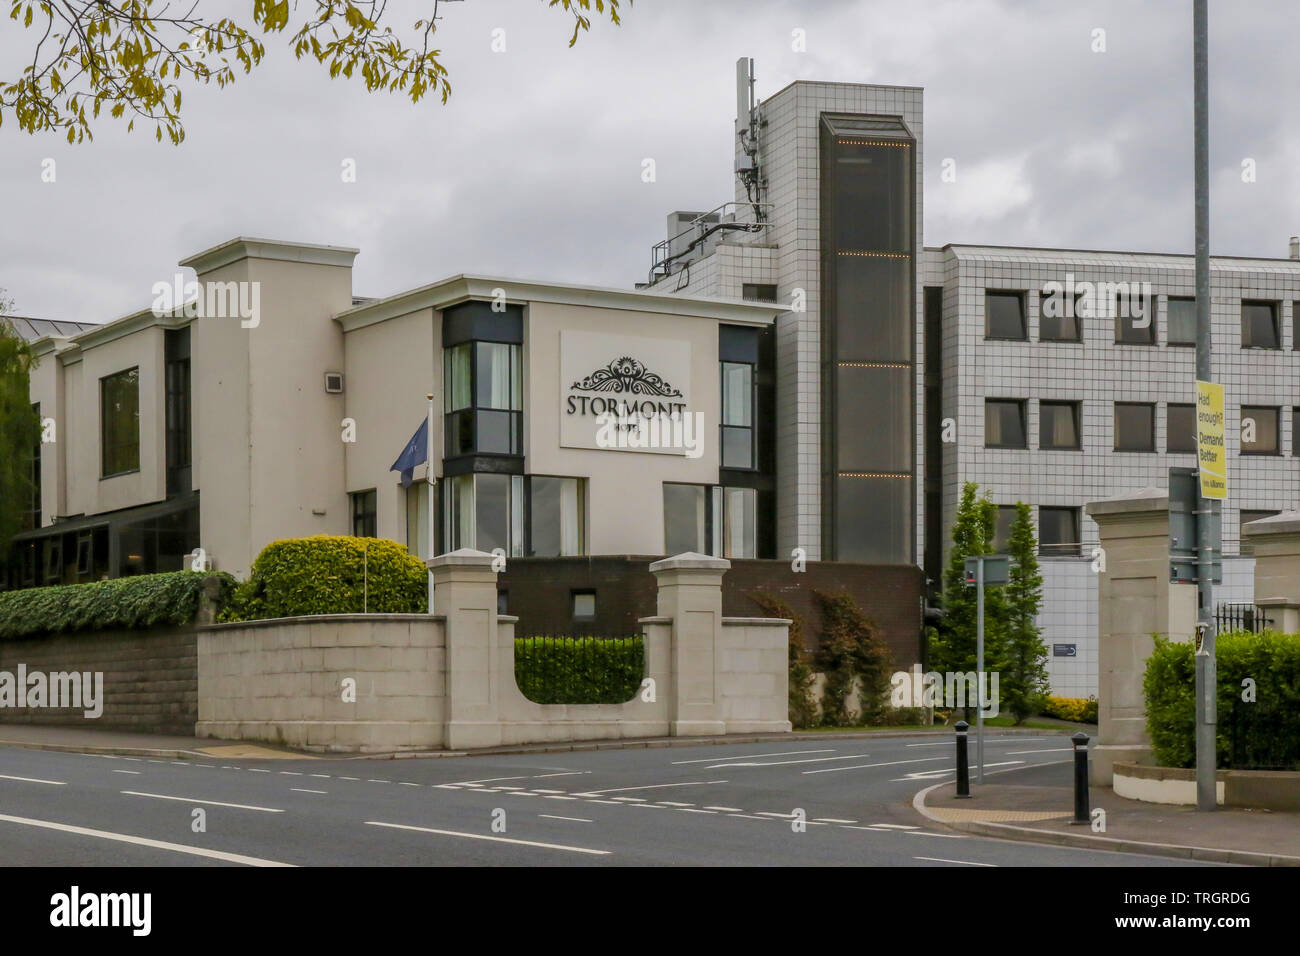 Outside of the Stormont Hotel in Belfast, Northern Ireland. The Stormont Hotel is a Hastings Group hotel. Stock Photo